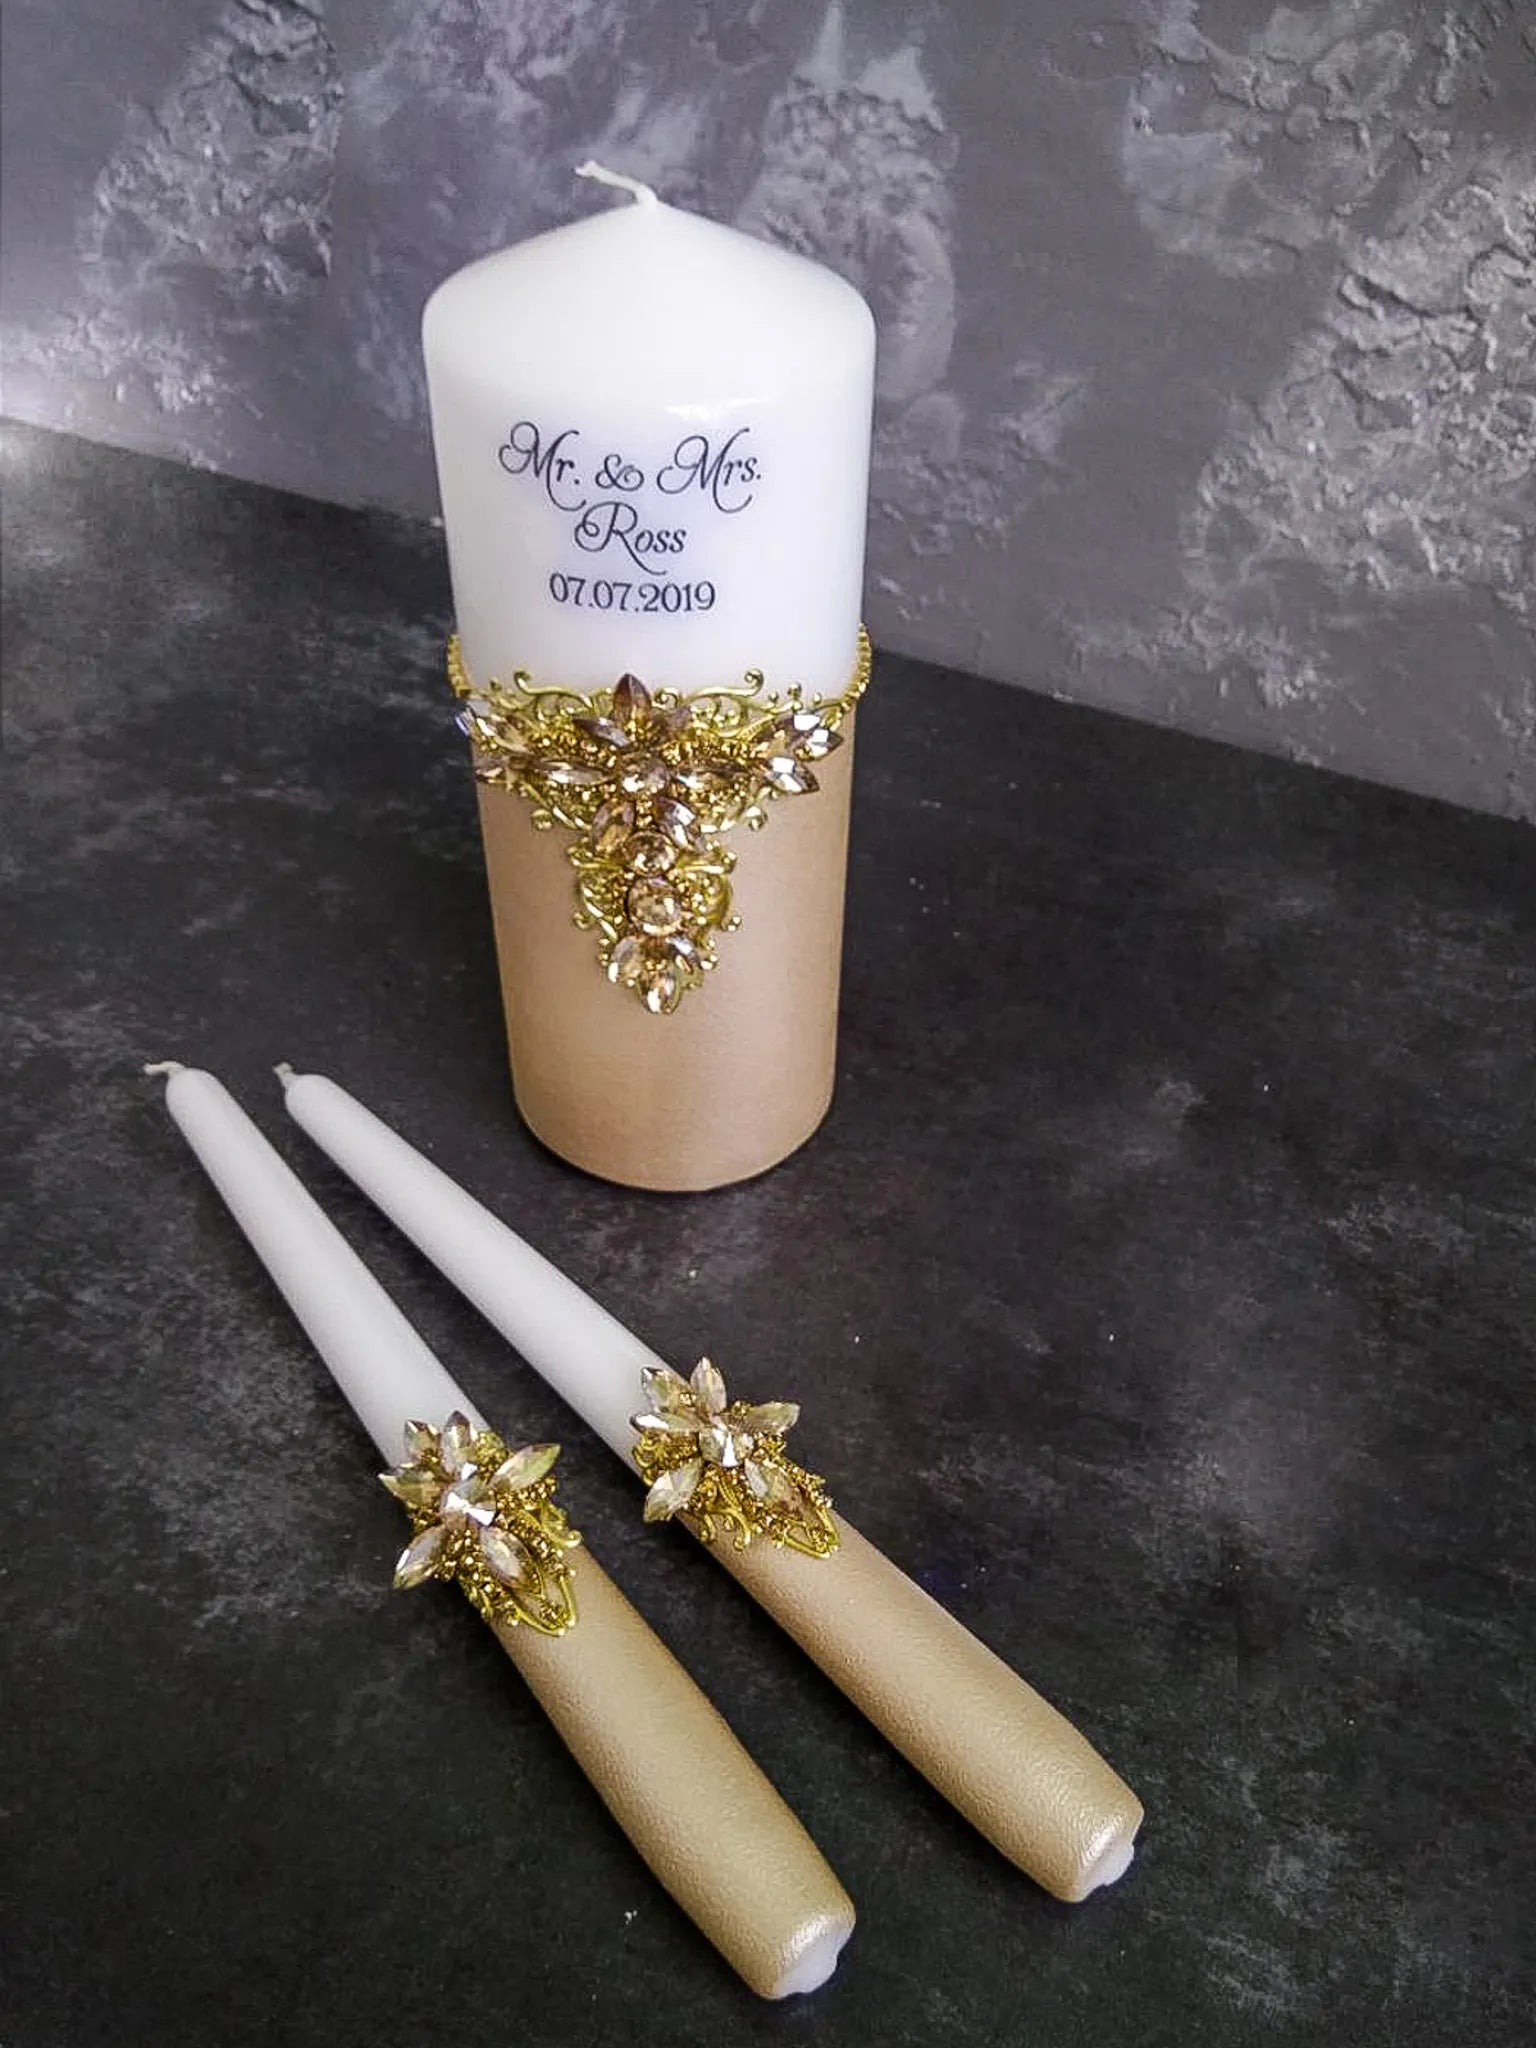 Illuminate special moments with gold crystal candles